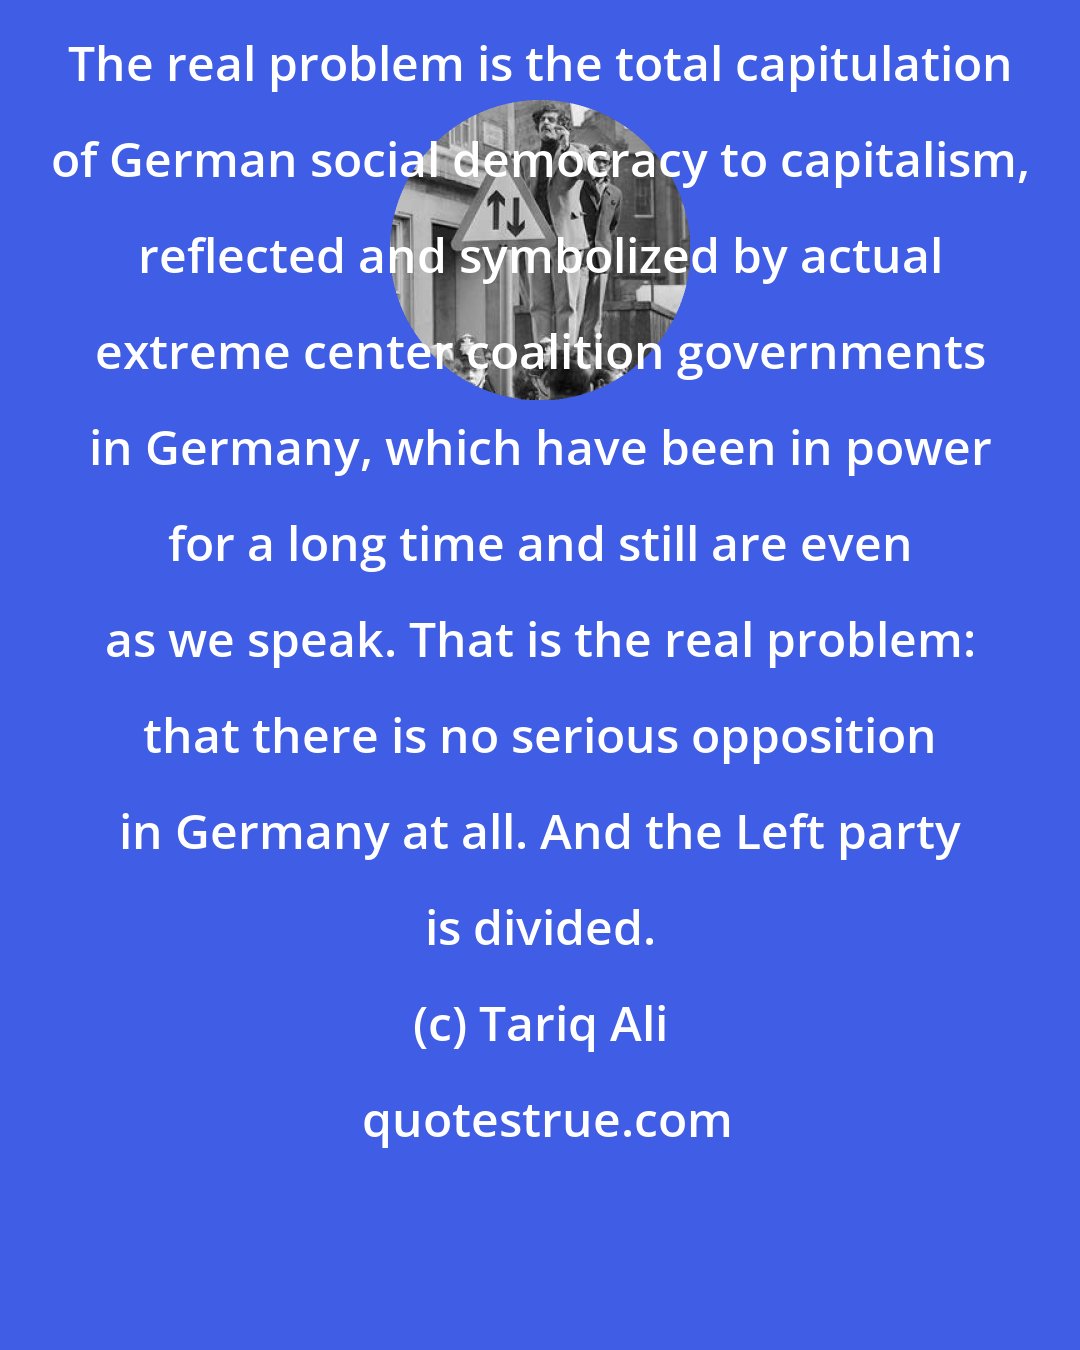 Tariq Ali: The real problem is the total capitulation of German social democracy to capitalism, reflected and symbolized by actual extreme center coalition governments in Germany, which have been in power for a long time and still are even as we speak. That is the real problem: that there is no serious opposition in Germany at all. And the Left party is divided.